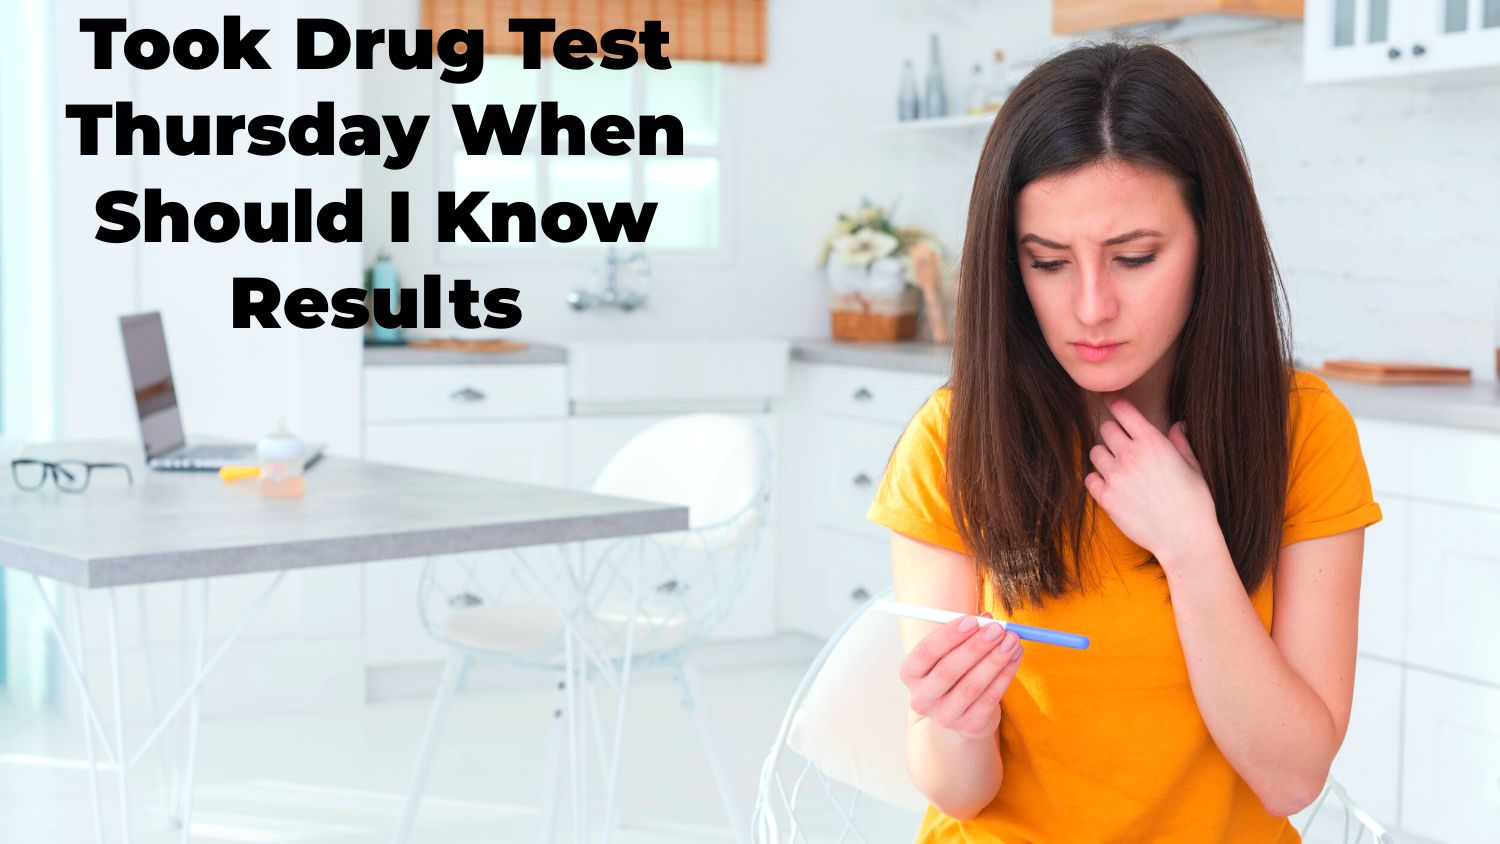 Took Drug Test Thursday When Should I Know Results